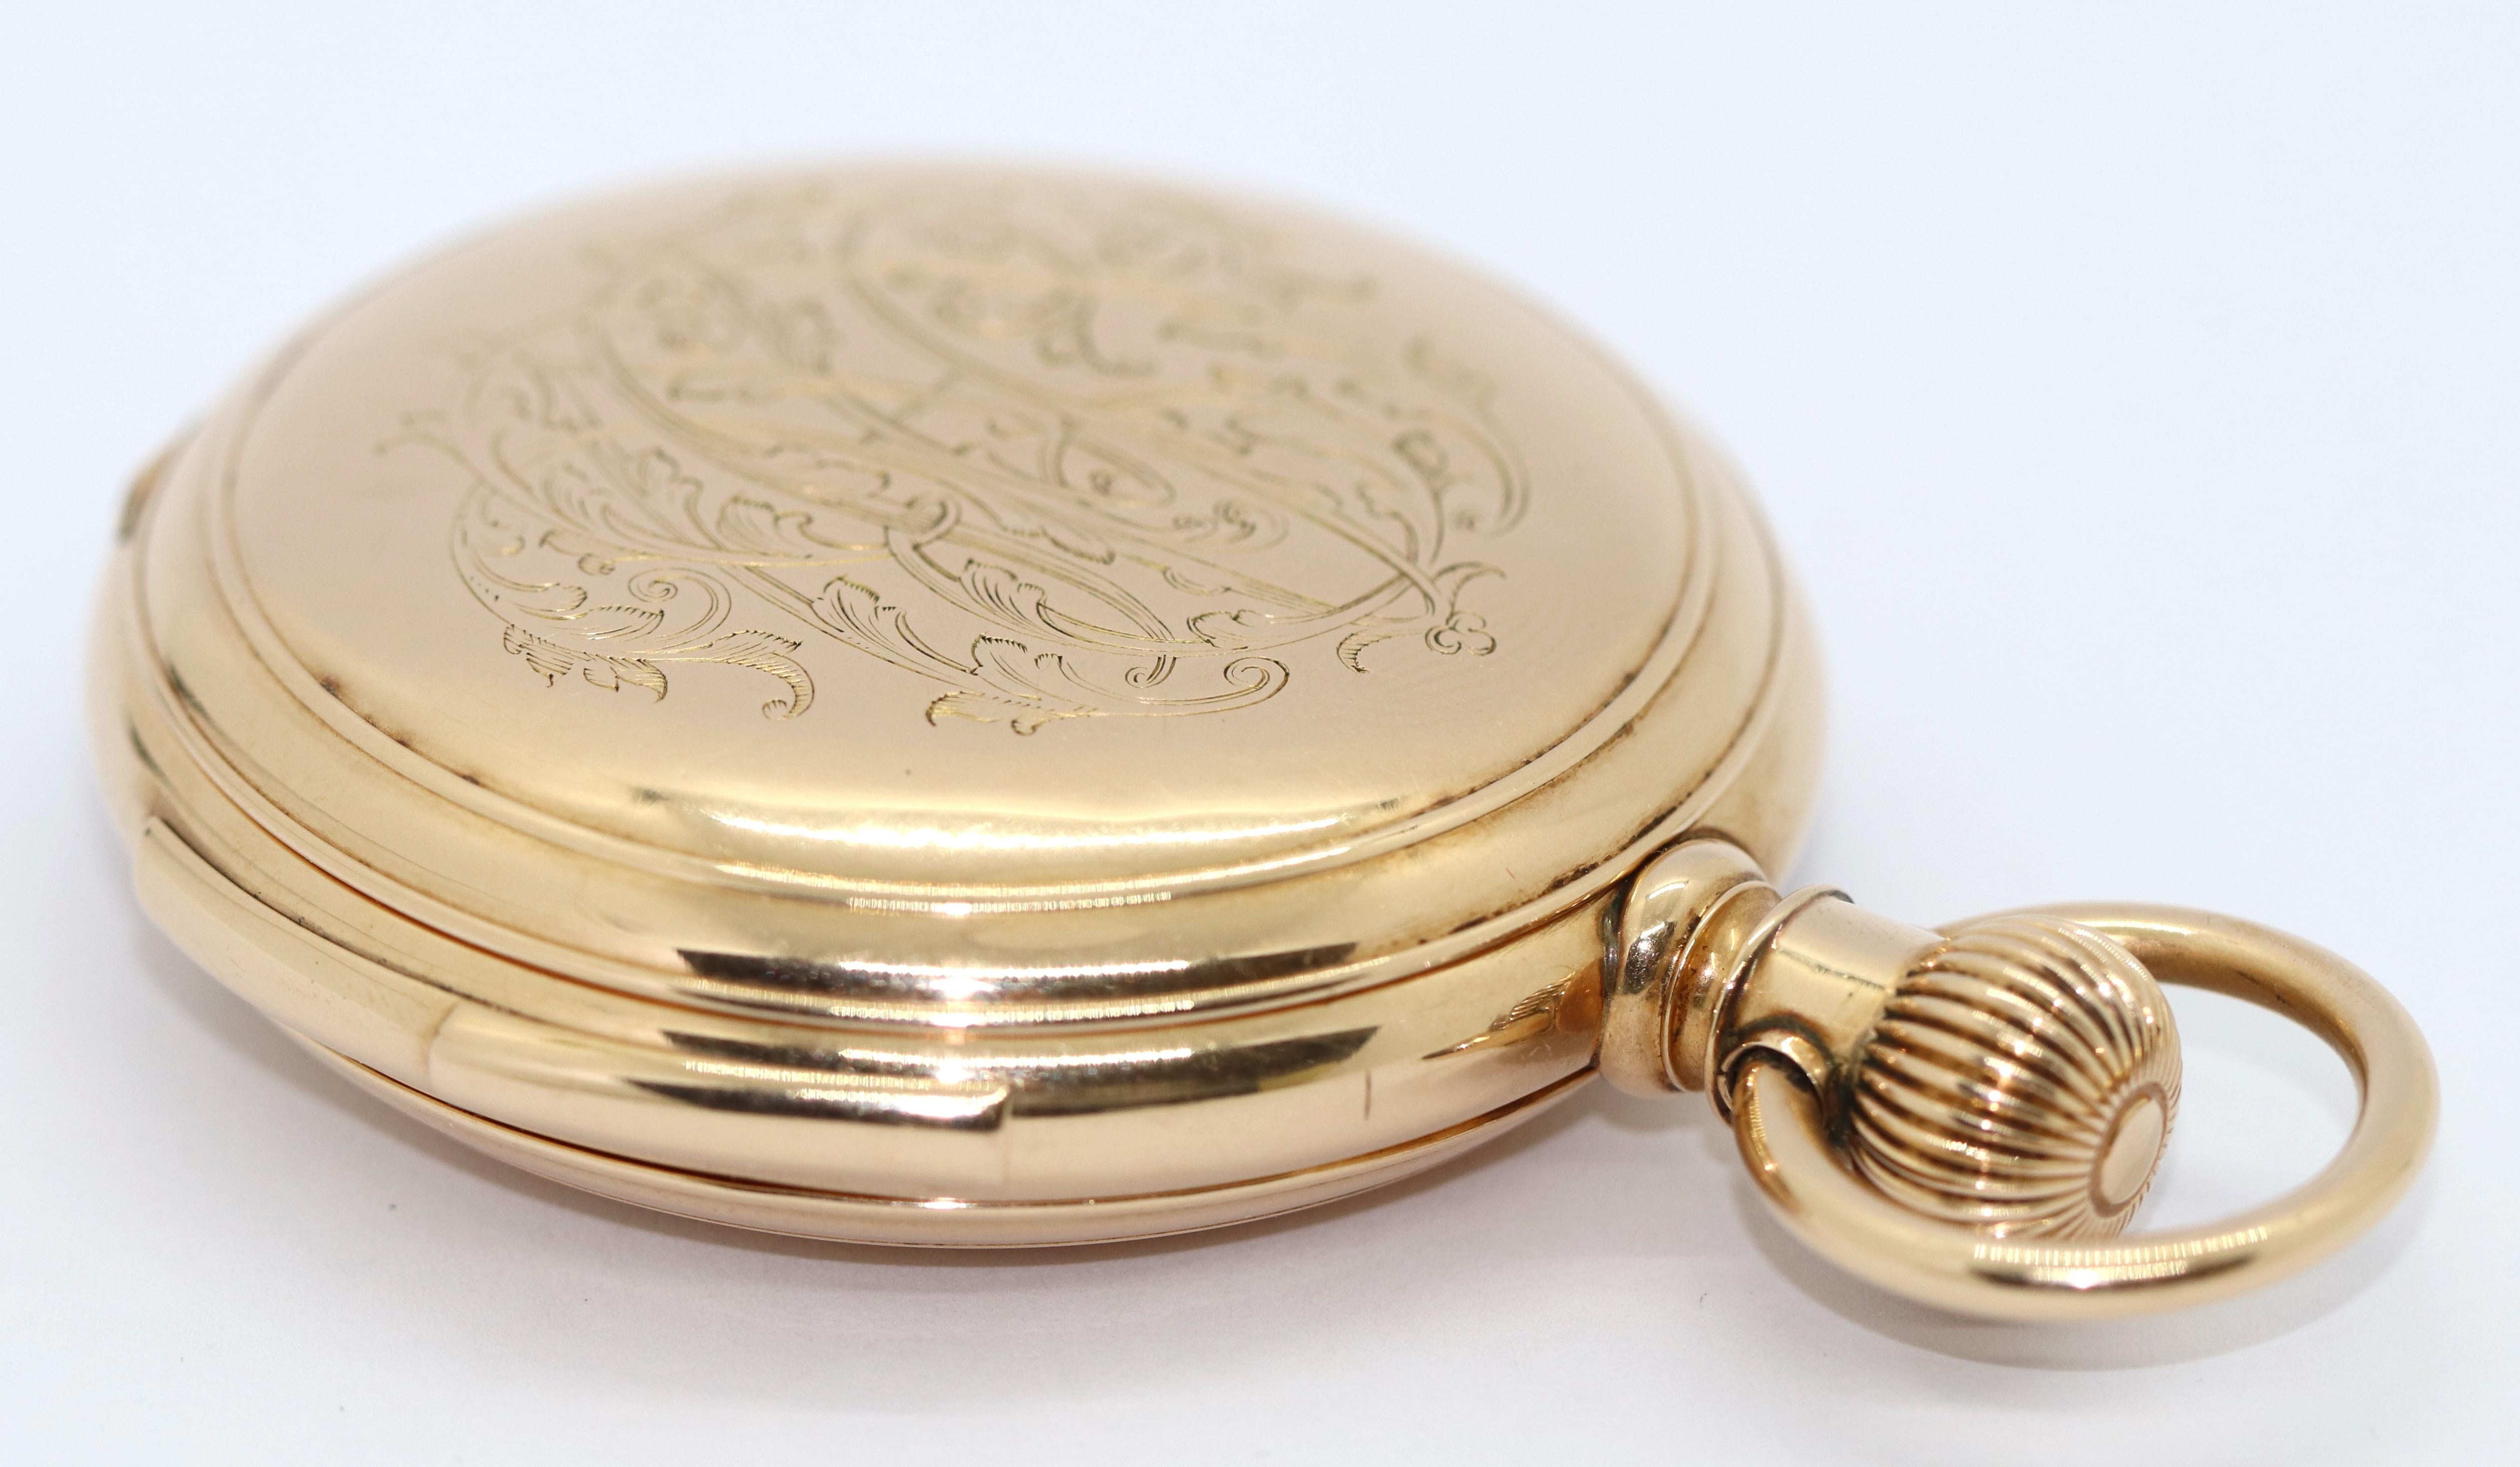 14K Gold Pocket Hunter Watch by American Watch Co. Waltham, Chronograph Repeater For Sale 4